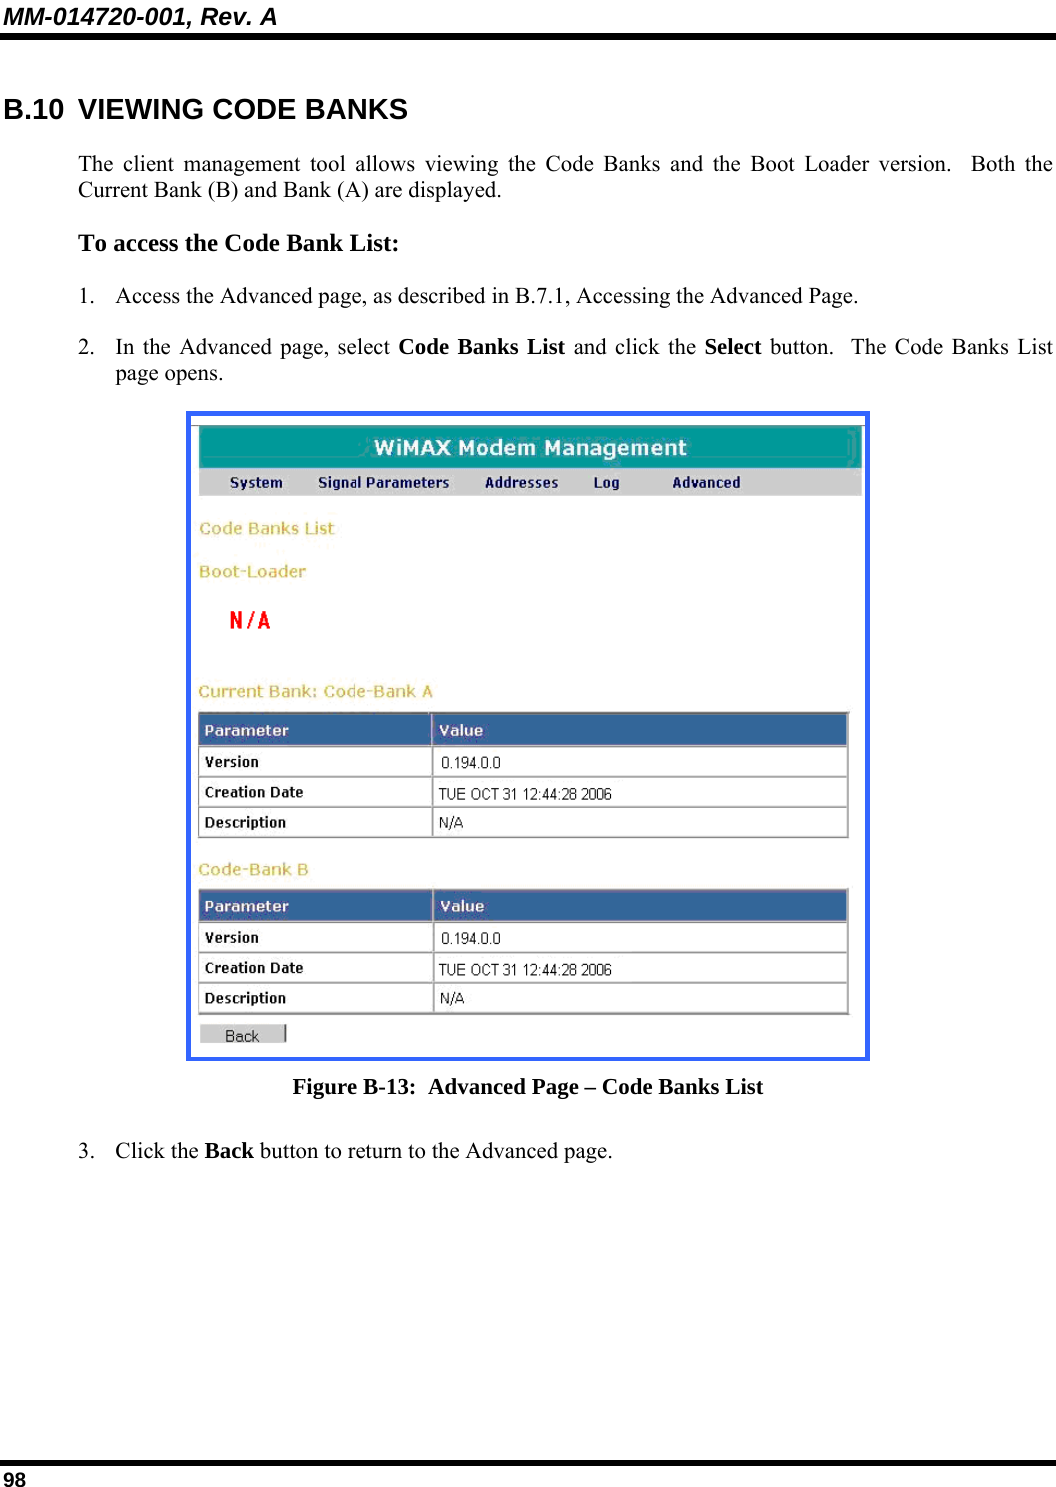 MM-014720-001, Rev. A 98 B.10  VIEWING CODE BANKS The client management tool allows viewing the Code Banks and the Boot Loader version.  Both the Current Bank (B) and Bank (A) are displayed.  To access the Code Bank List:  1. Access the Advanced page, as described in B.7.1, Accessing the Advanced Page.  2. In the Advanced page, select Code Banks List and click the Select button.  The Code Banks List page opens.   Figure B-13:  Advanced Page – Code Banks List 3. Click the Back button to return to the Advanced page. 